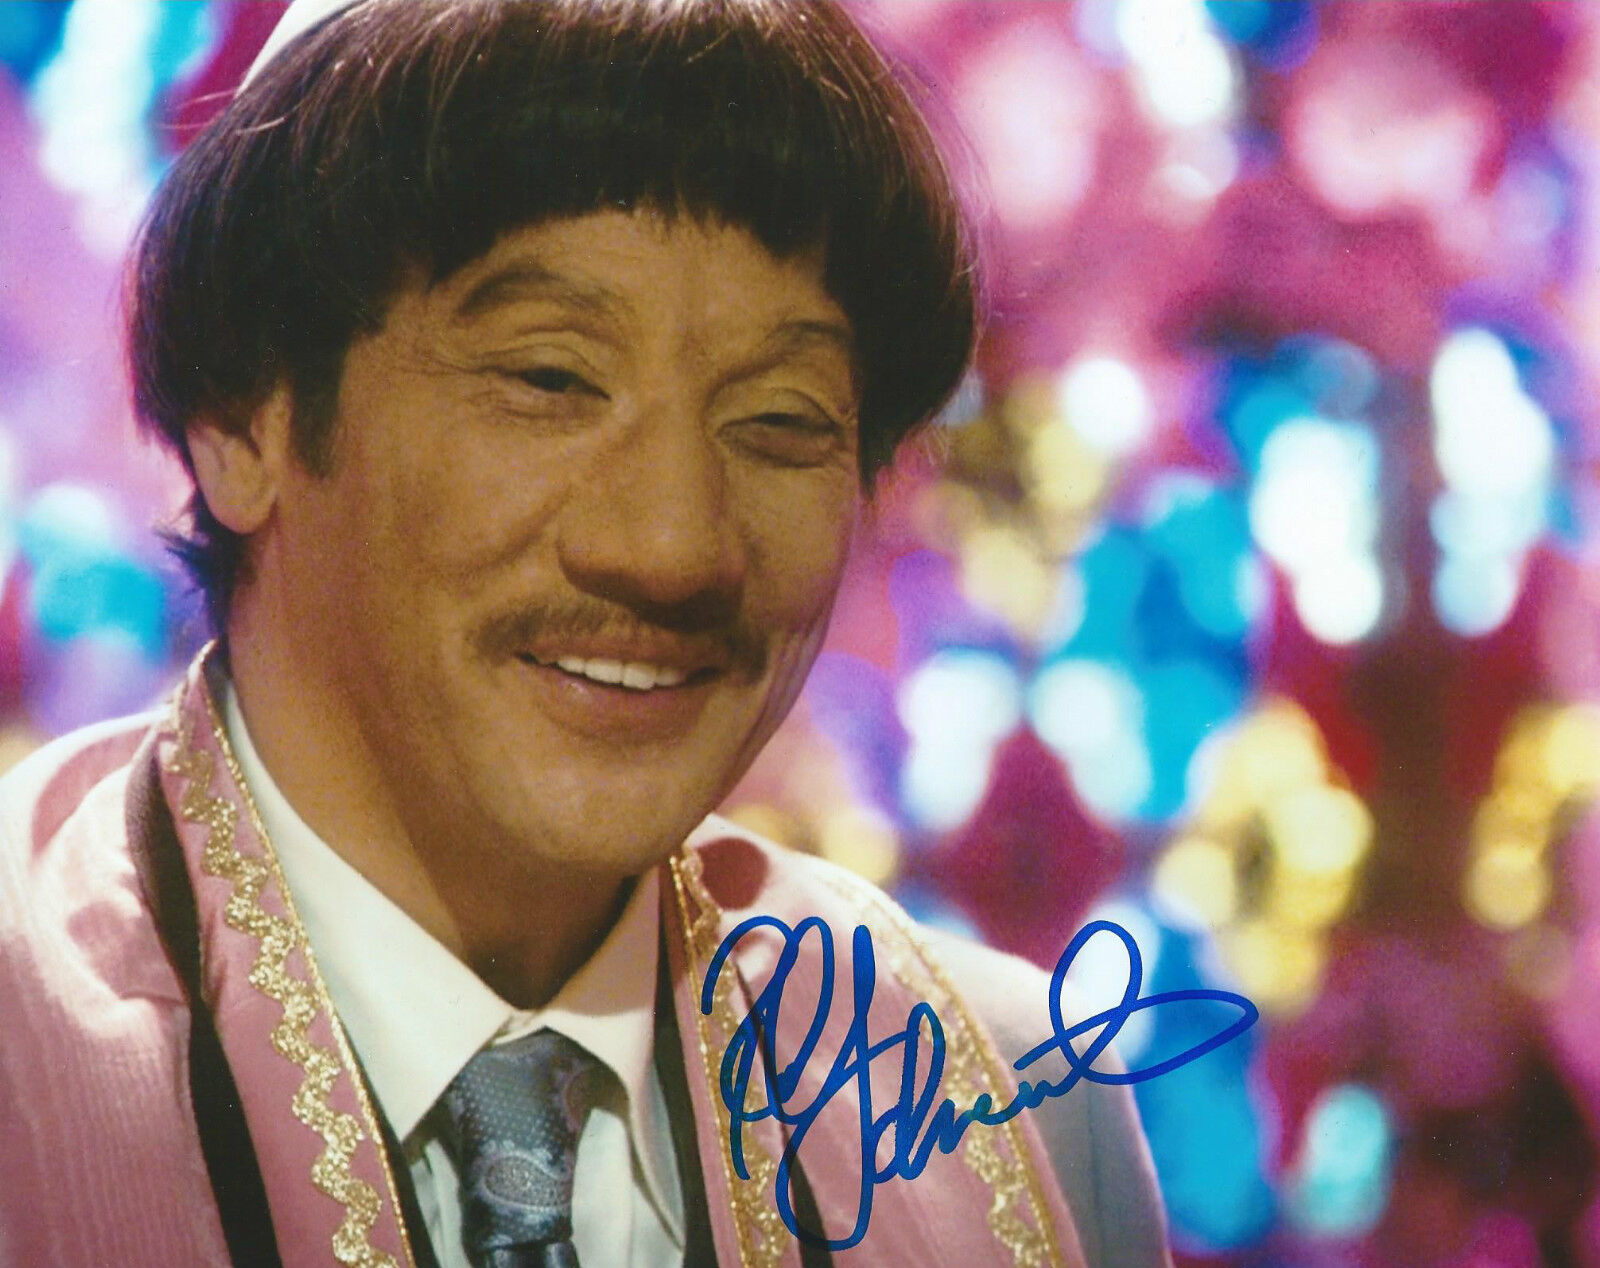 **GFA Chuck and Larry Movie *ROB SCHNEIDER* Signed 8x10 Photo Poster painting AD2 PROOF COA**